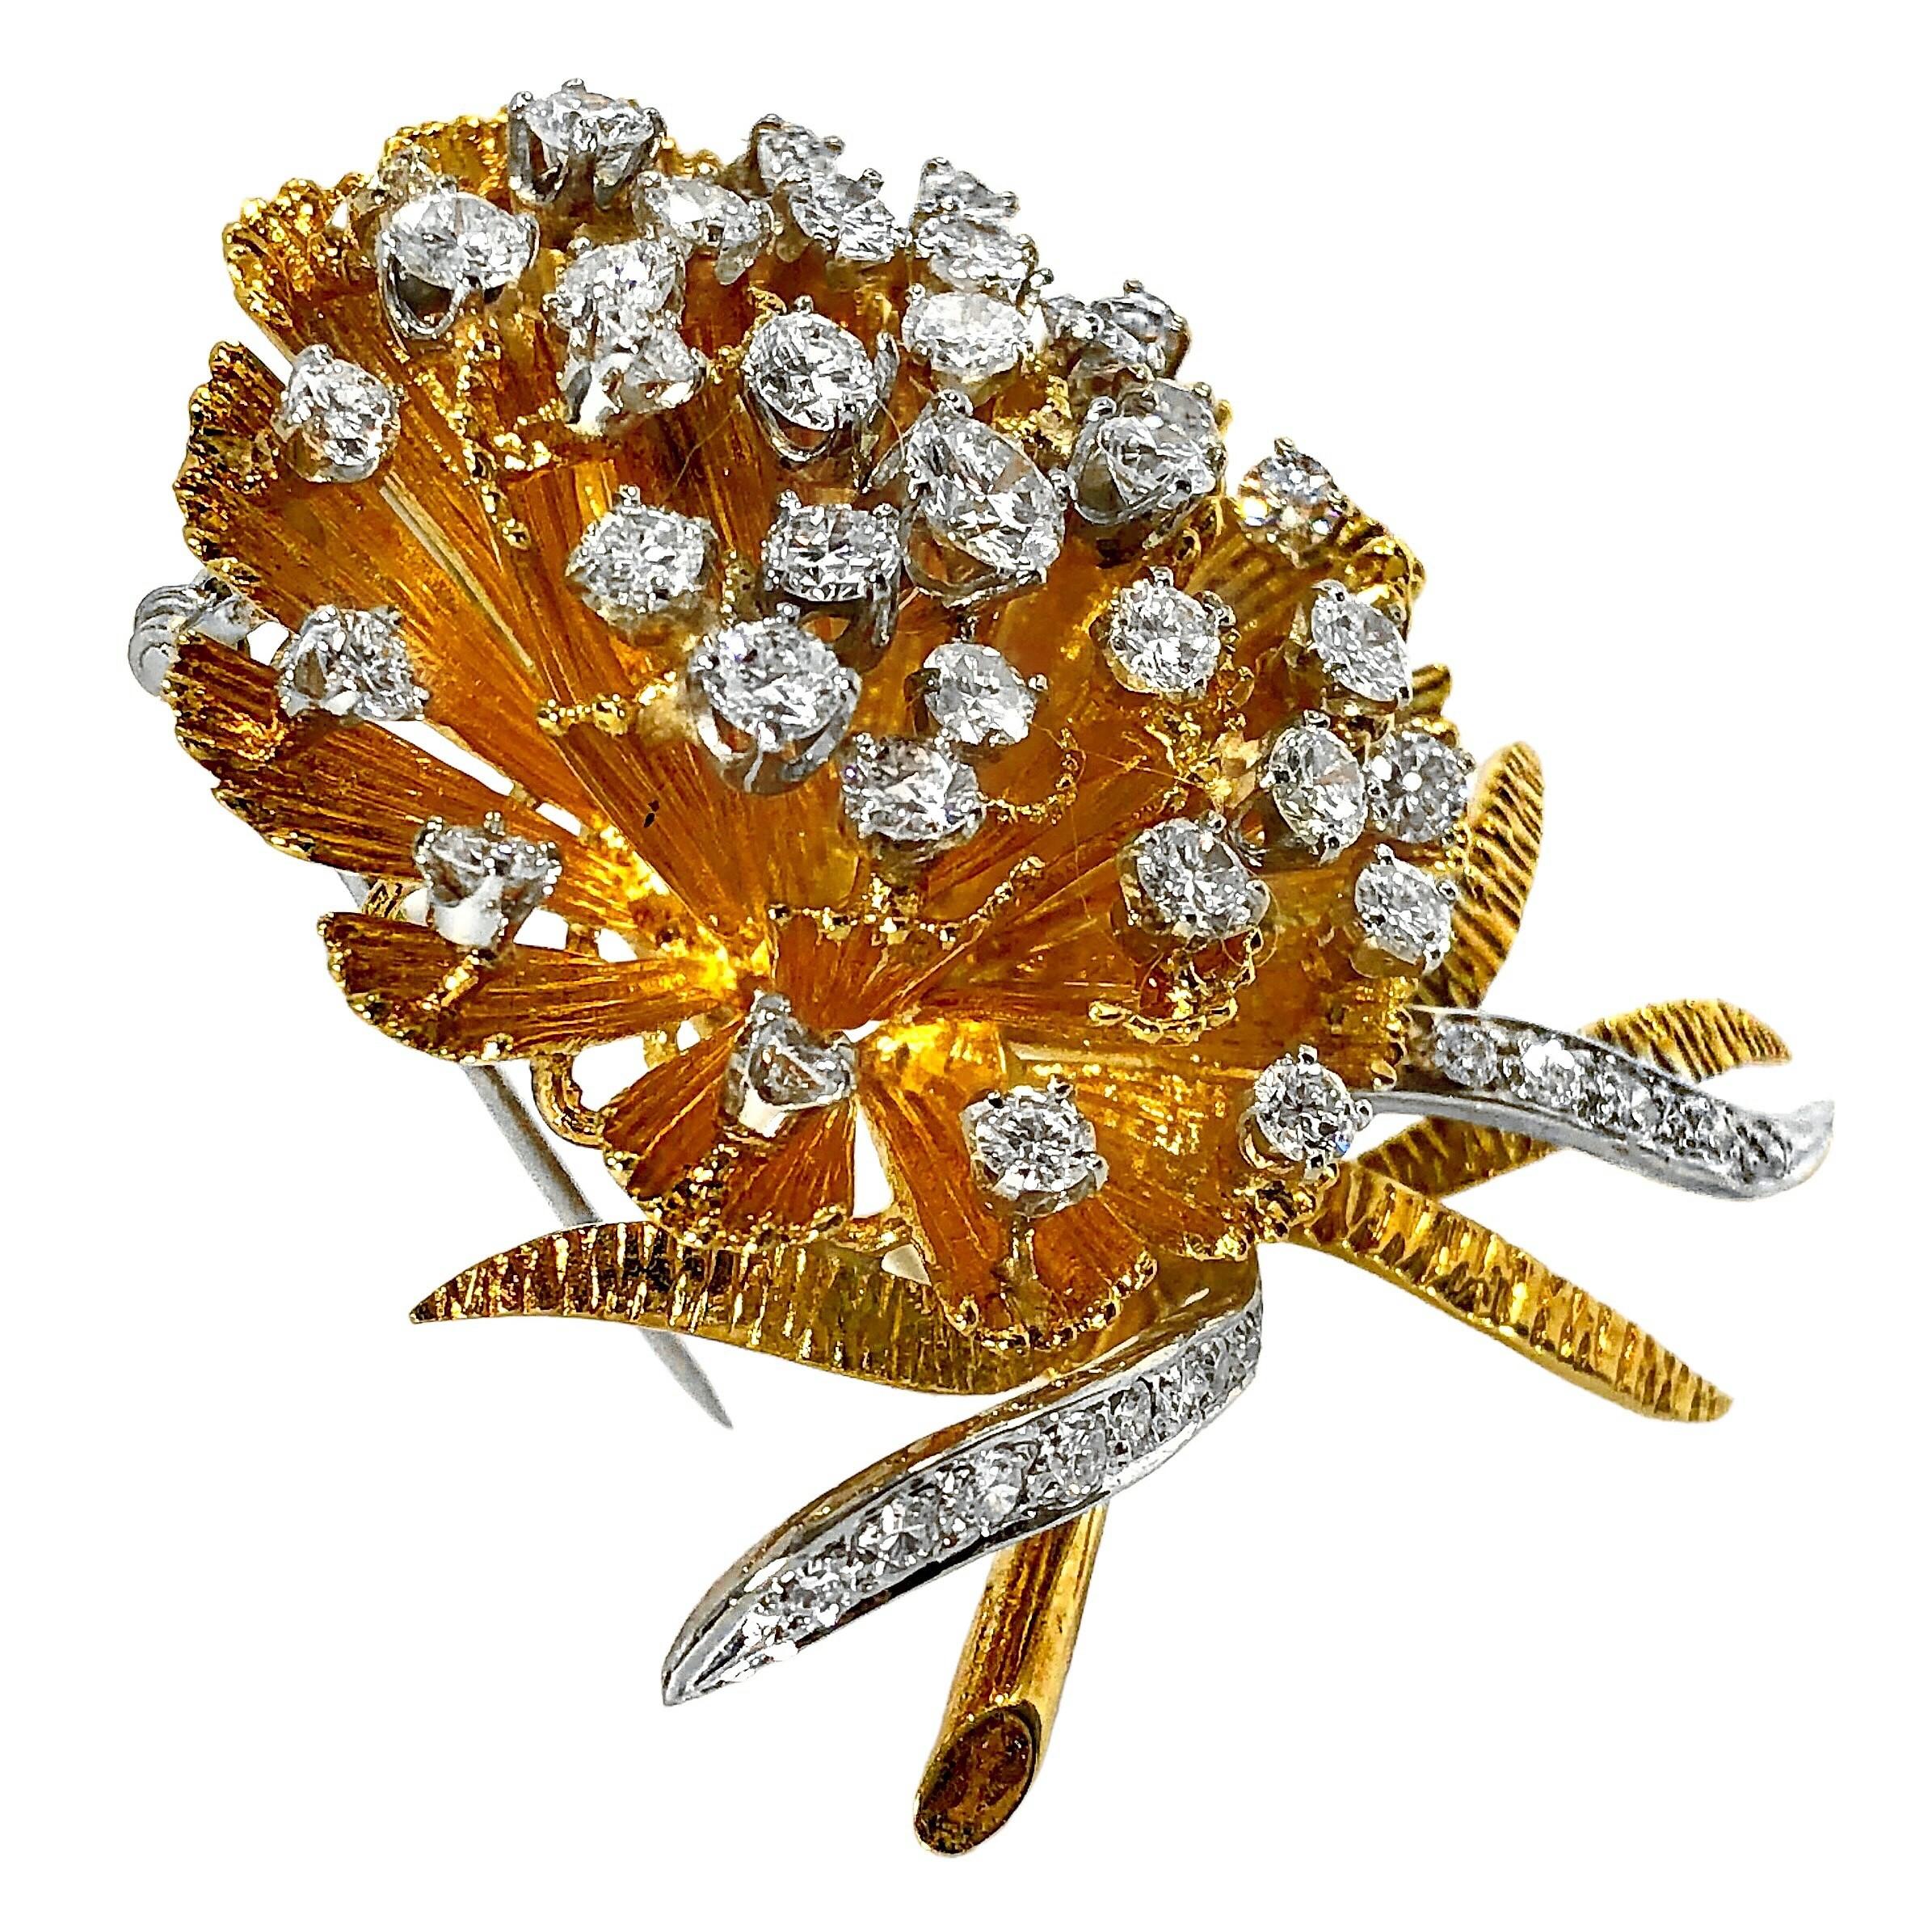 This scintillating 1960's flower cocktail brooch is unmistakably Mid-20th Century chic! With lots of hand made details, this is truly a unique and beautiful article of jewelry.  Spread across the body of the flower are numerous brilliant cut